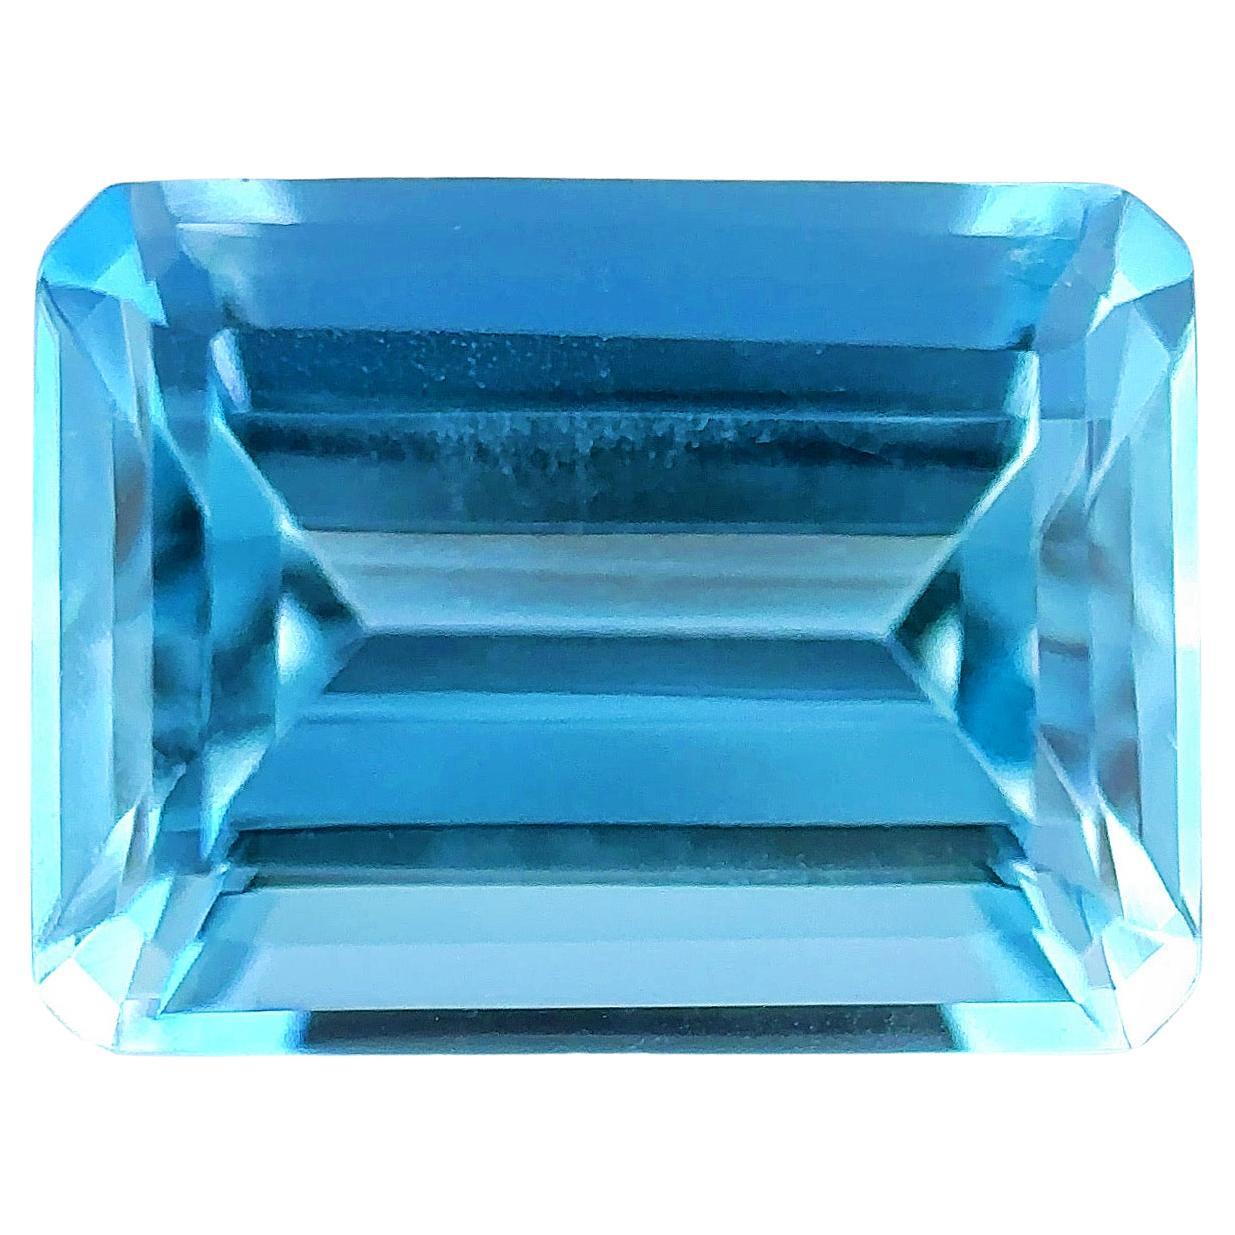 1.76 Carat Natural Super Santa Maria Color Aquamarine Loose Stone

Appointed lab certificate can be arranged upon request

This Item is ideal for your design as an engagement ring, cocktail ring, necklace, bracelet, etc.


ABOUT US

Xuelai Jewellery